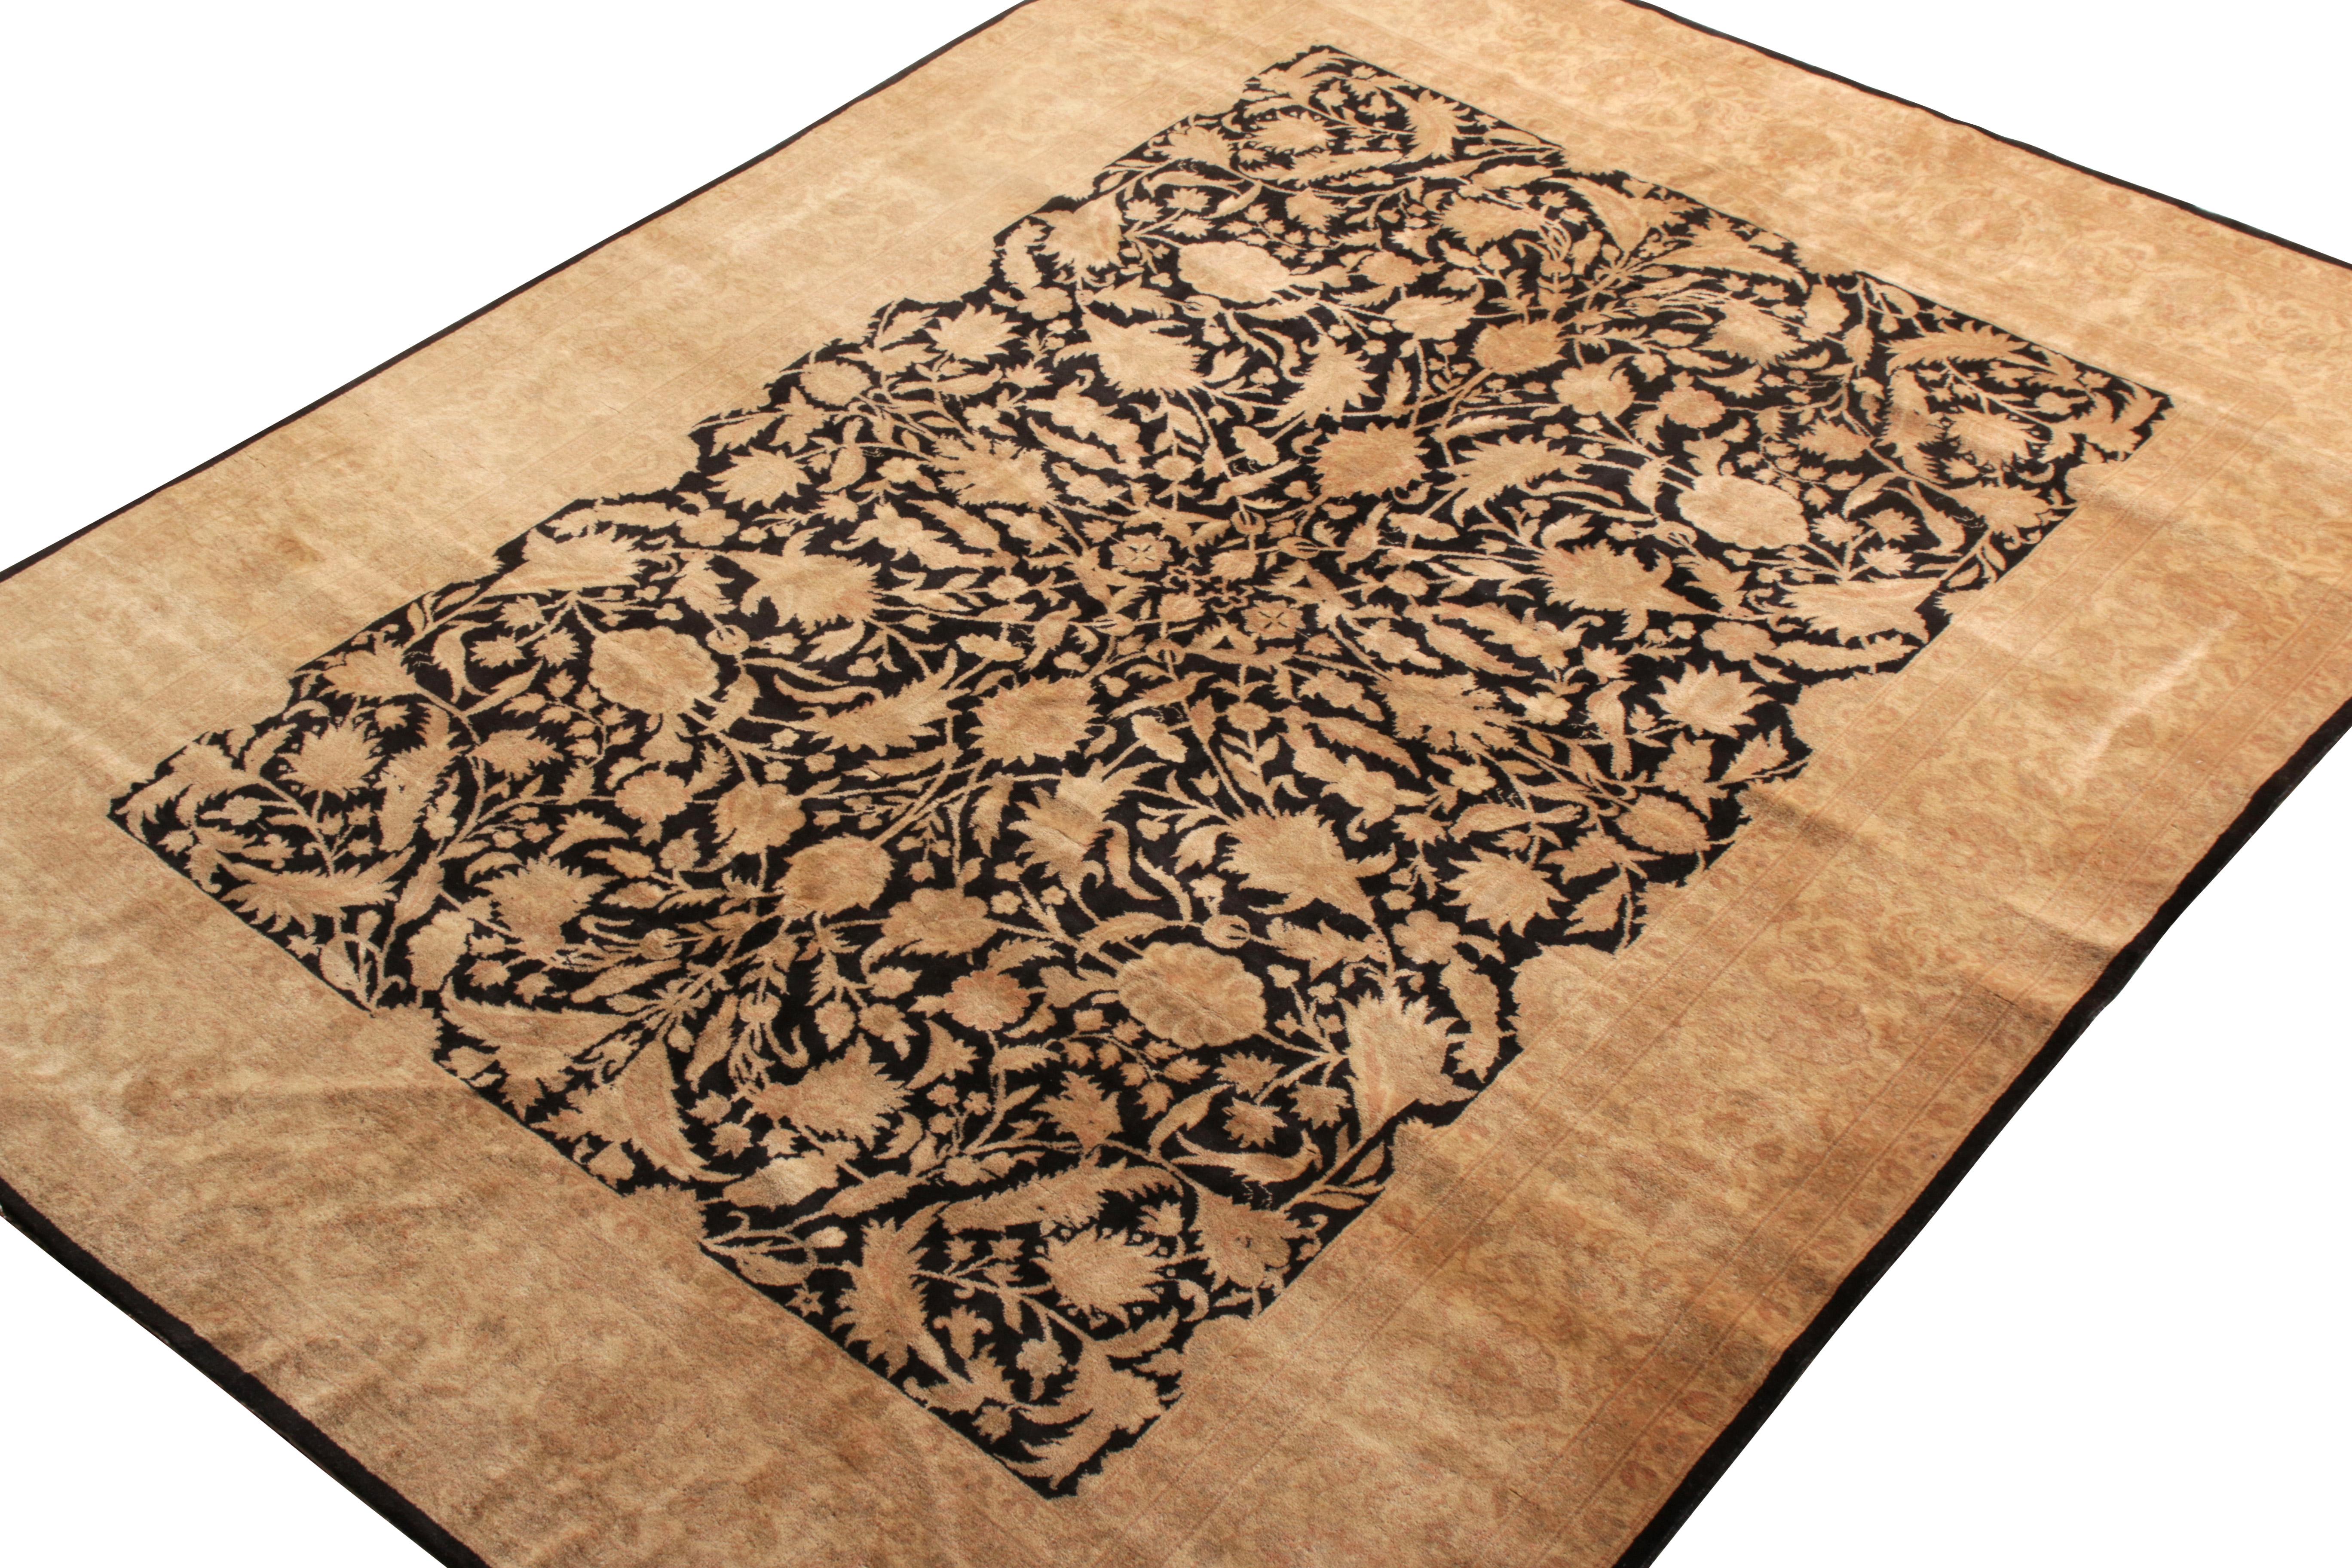 Modern Rug & Kilim’s Contemporary Rug in Beige-Brown and Black Floral Pattern For Sale